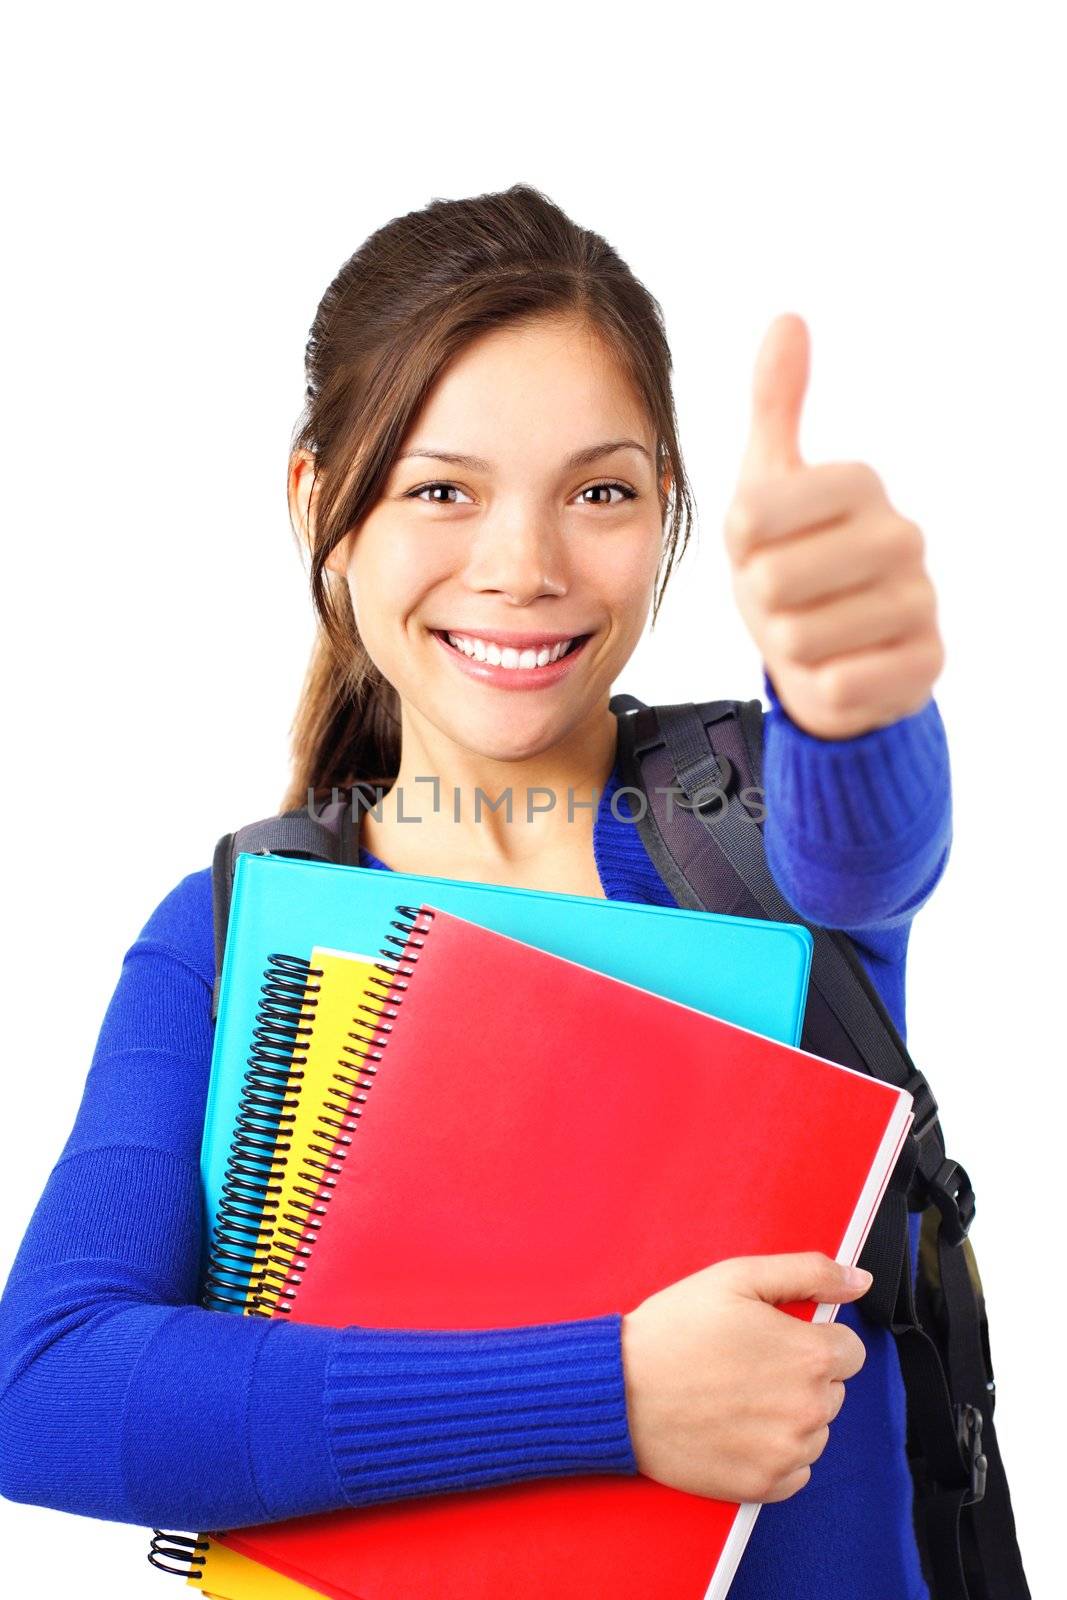 Happy college studendt showing thumbs up. Mixed asian / caucasian model. Isolated on white background.